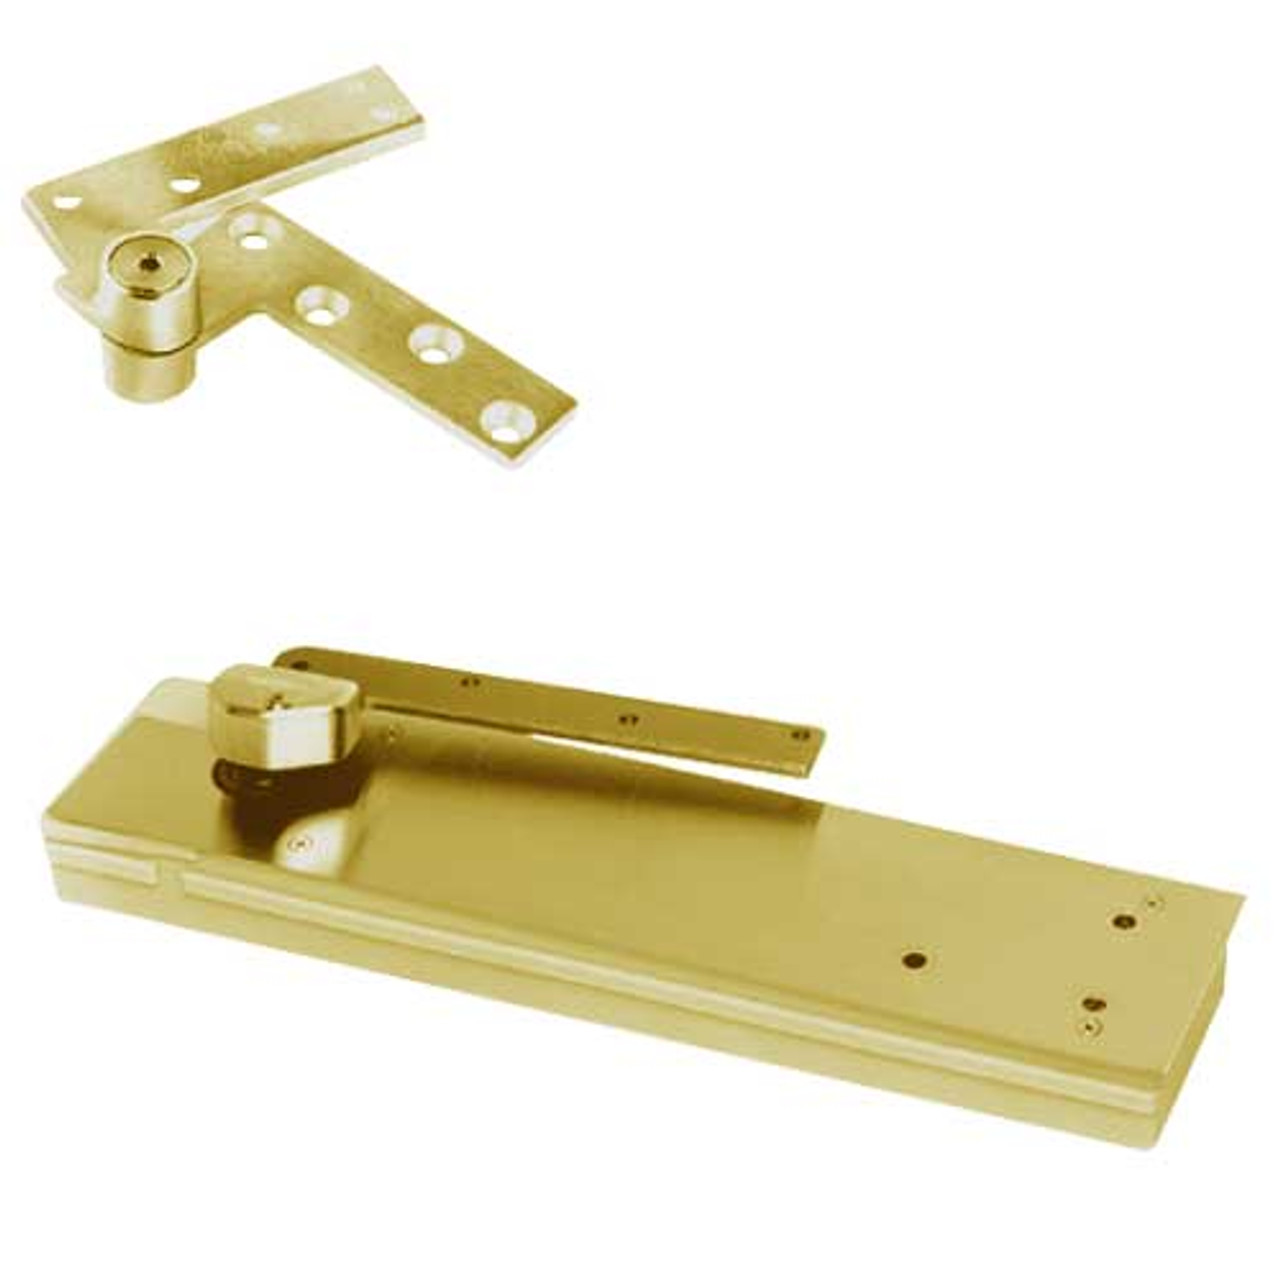 5104ABC105-1-1/2OS-LH-606 Rixson 51 Series 1-1/2" Offset Hung Shallow Depth Floor Closers in Satin Brass Finish